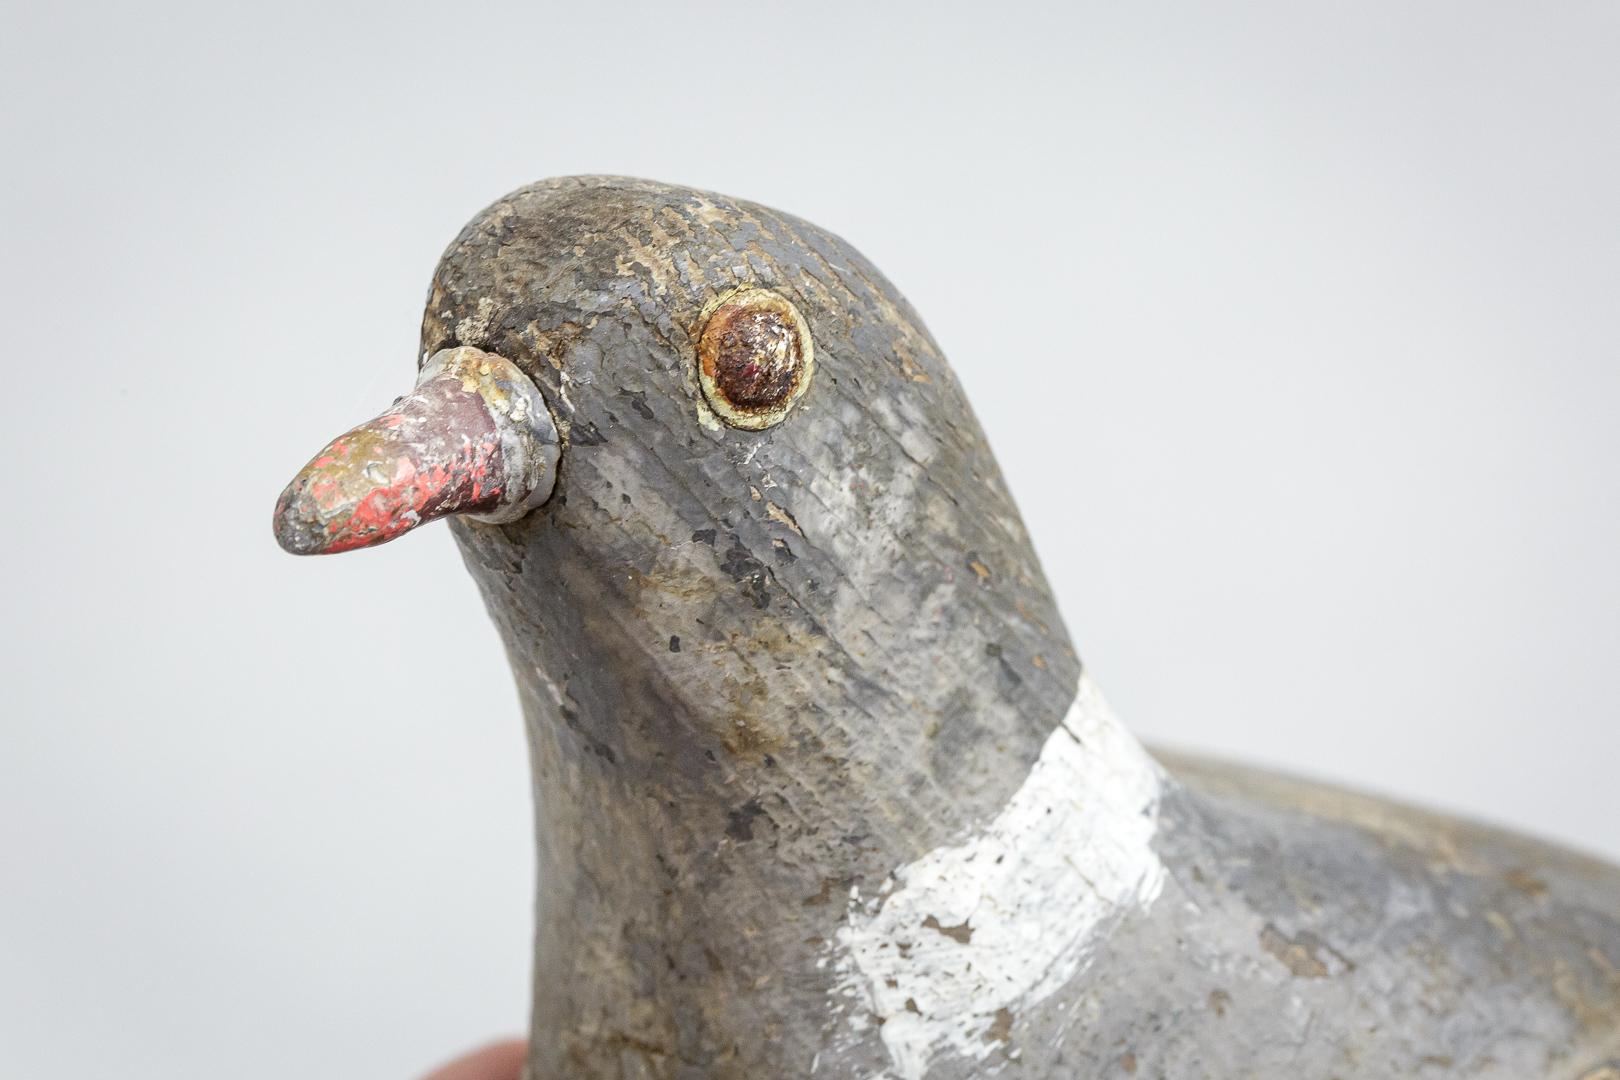 Wonderful early 20th century English wood pigeon decoy, found, turn of the 19th and 20th century in his original painted finish. Metal beak and iron eyes. Untouched distressed finish.